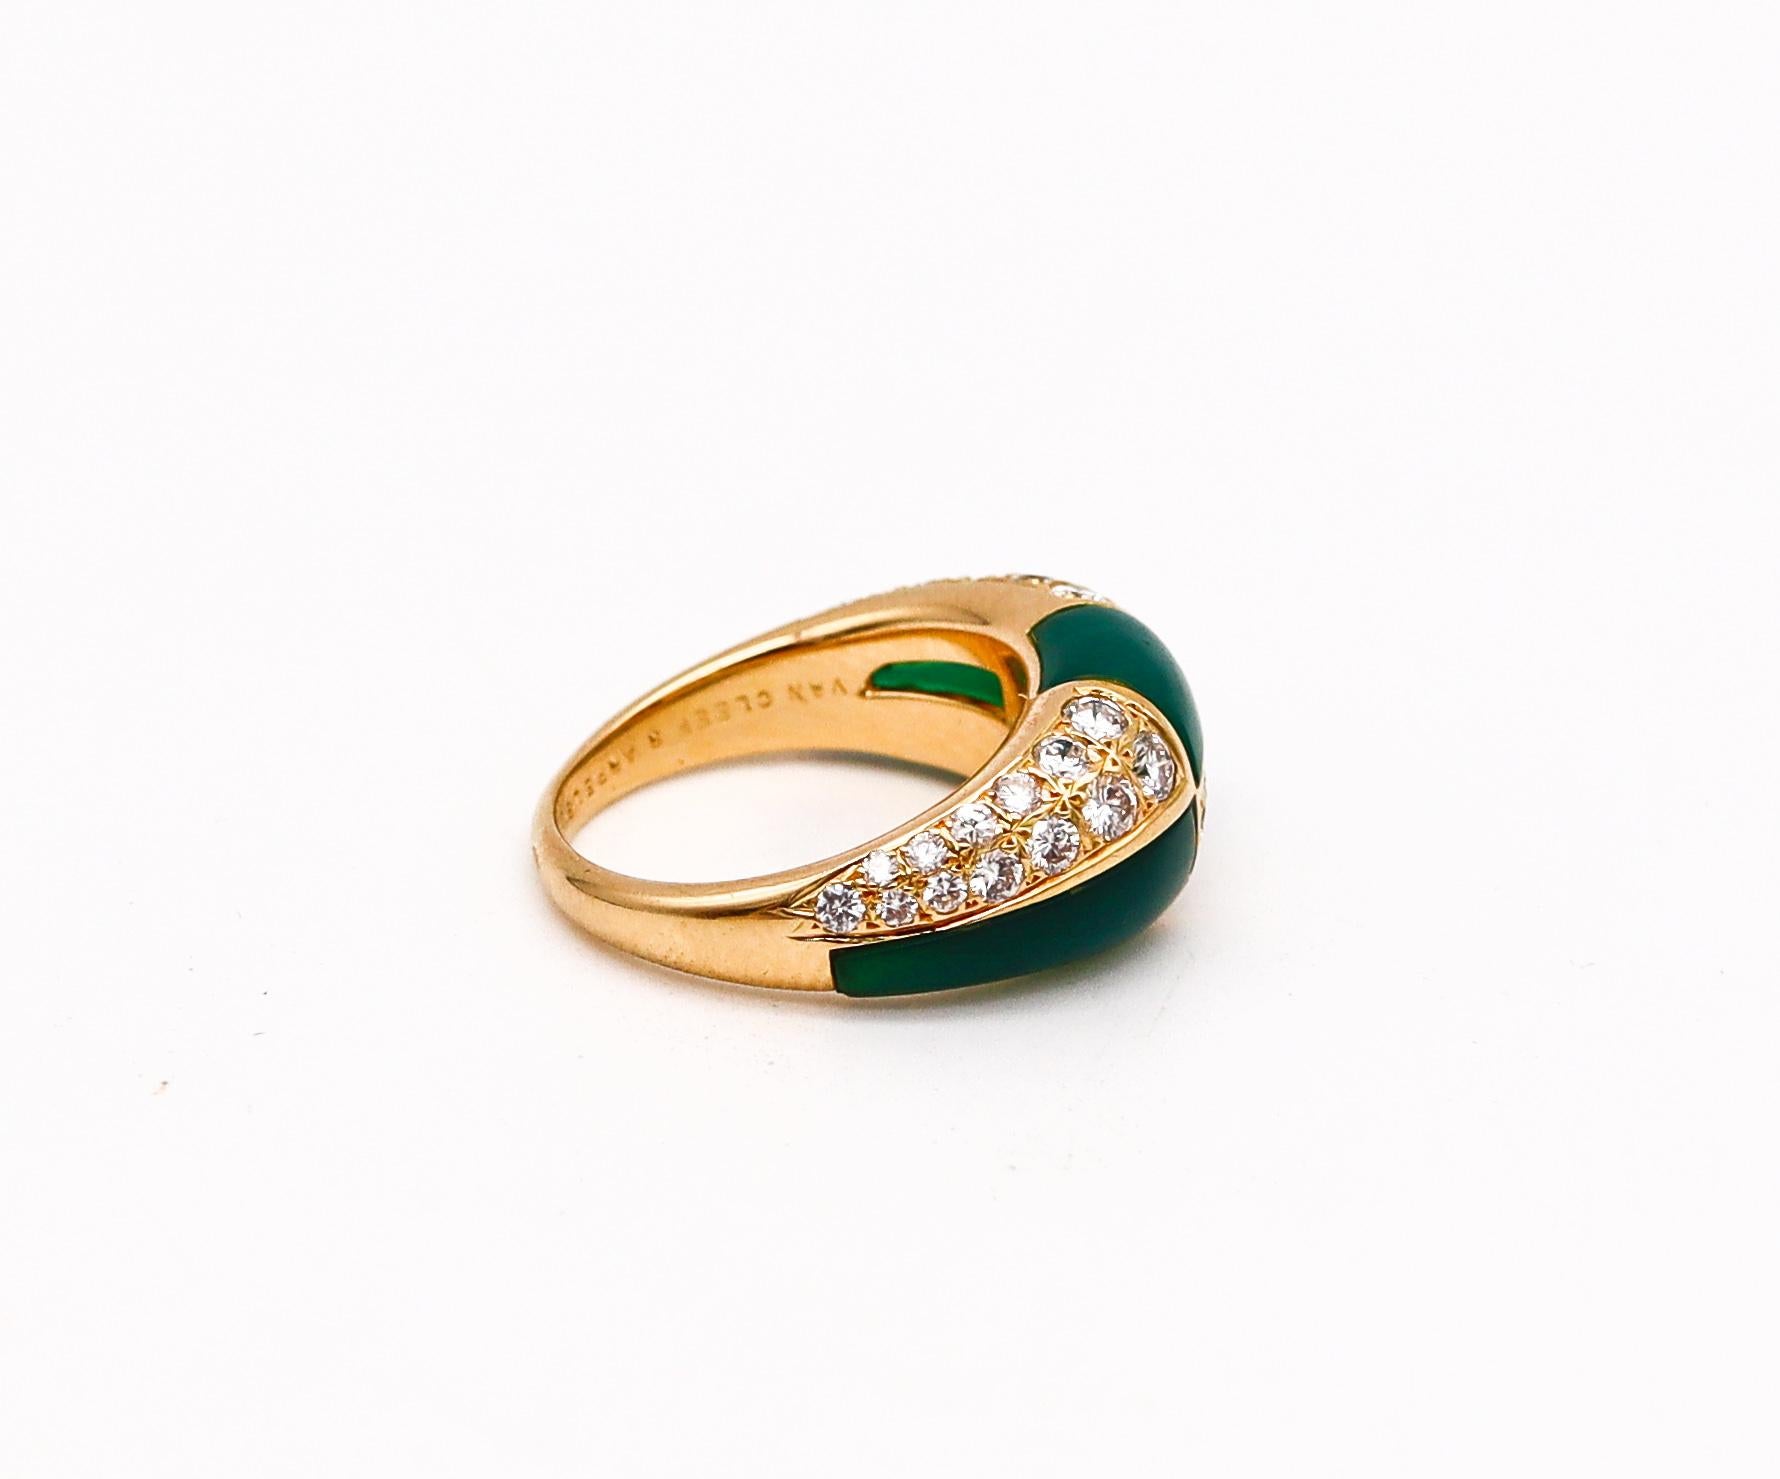 Van Cleef & Arpels 1973 Geometric Chrysoprase Ring 18kt Gold 1.45ctw Diamonds In Excellent Condition For Sale In Miami, FL